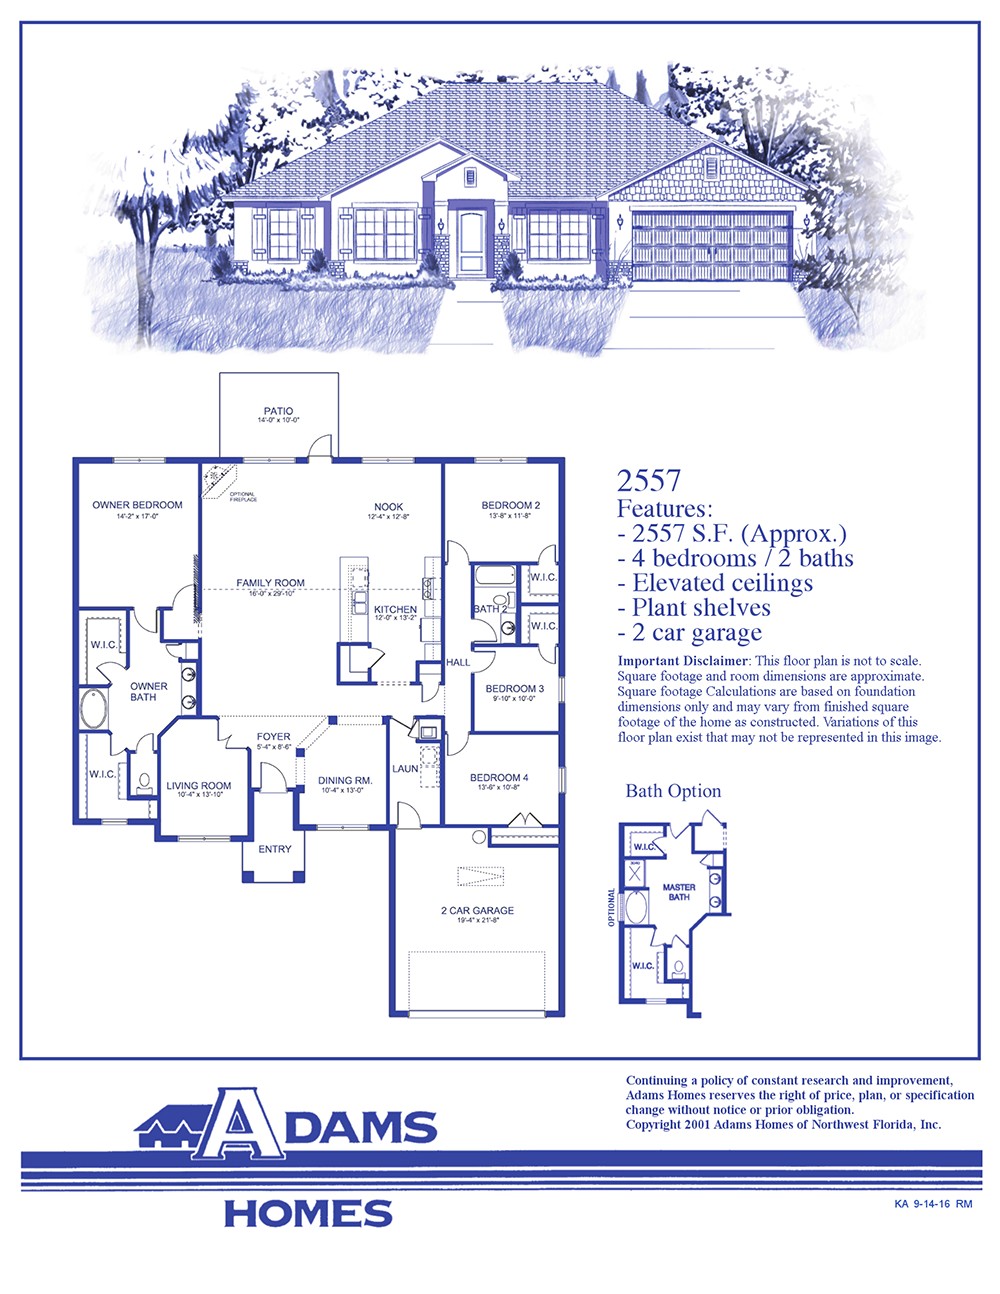 many cool home plans to choose from adams homes floor plans collection